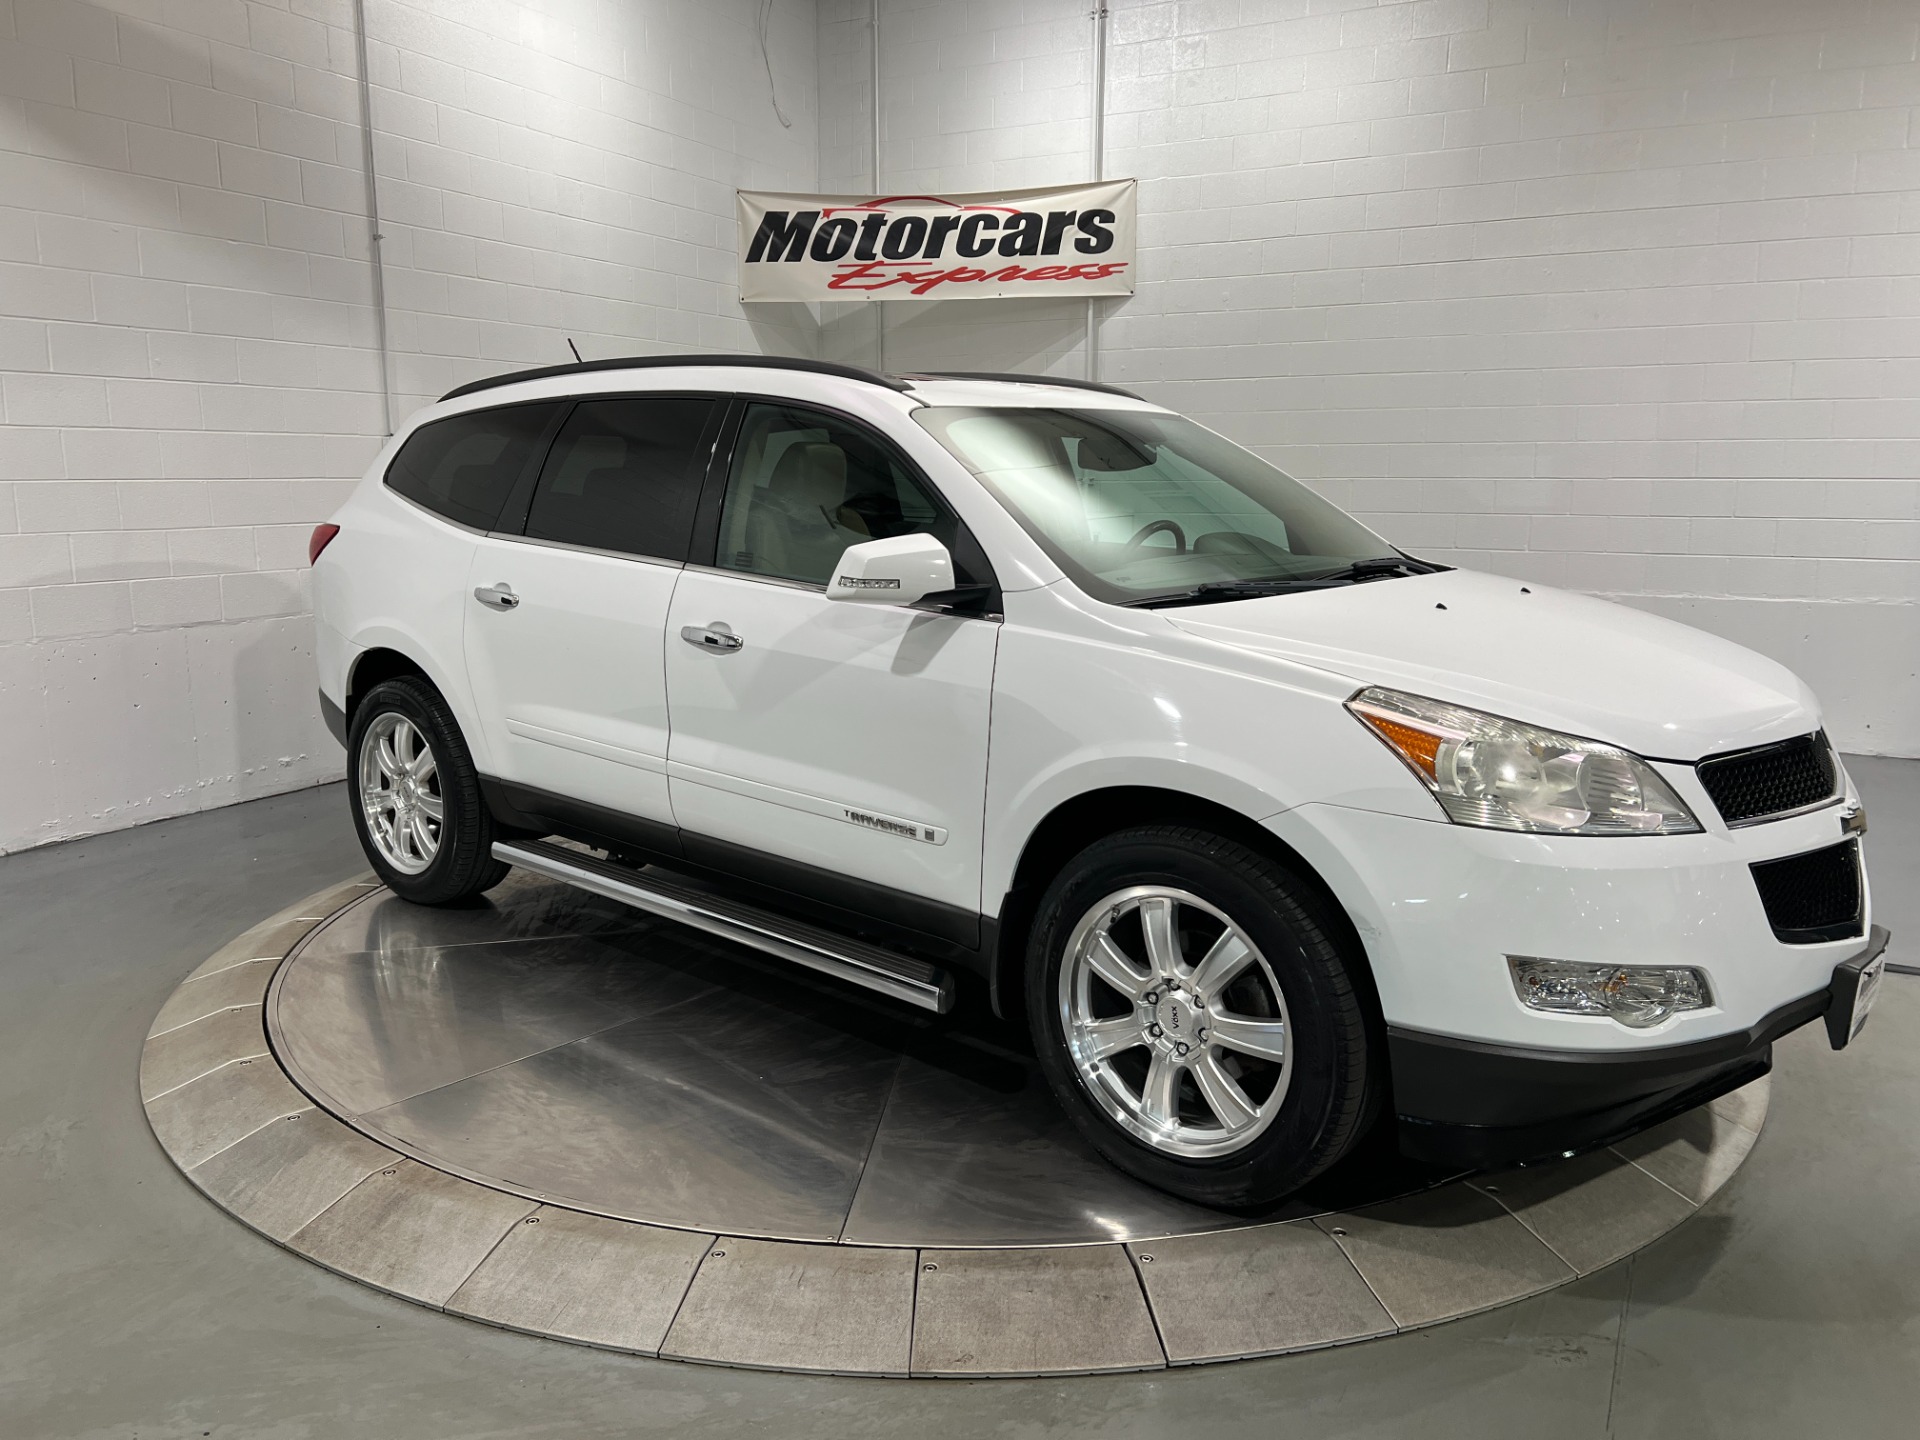 Used-2009-Chevrolet-Traverse-2LT-FWD